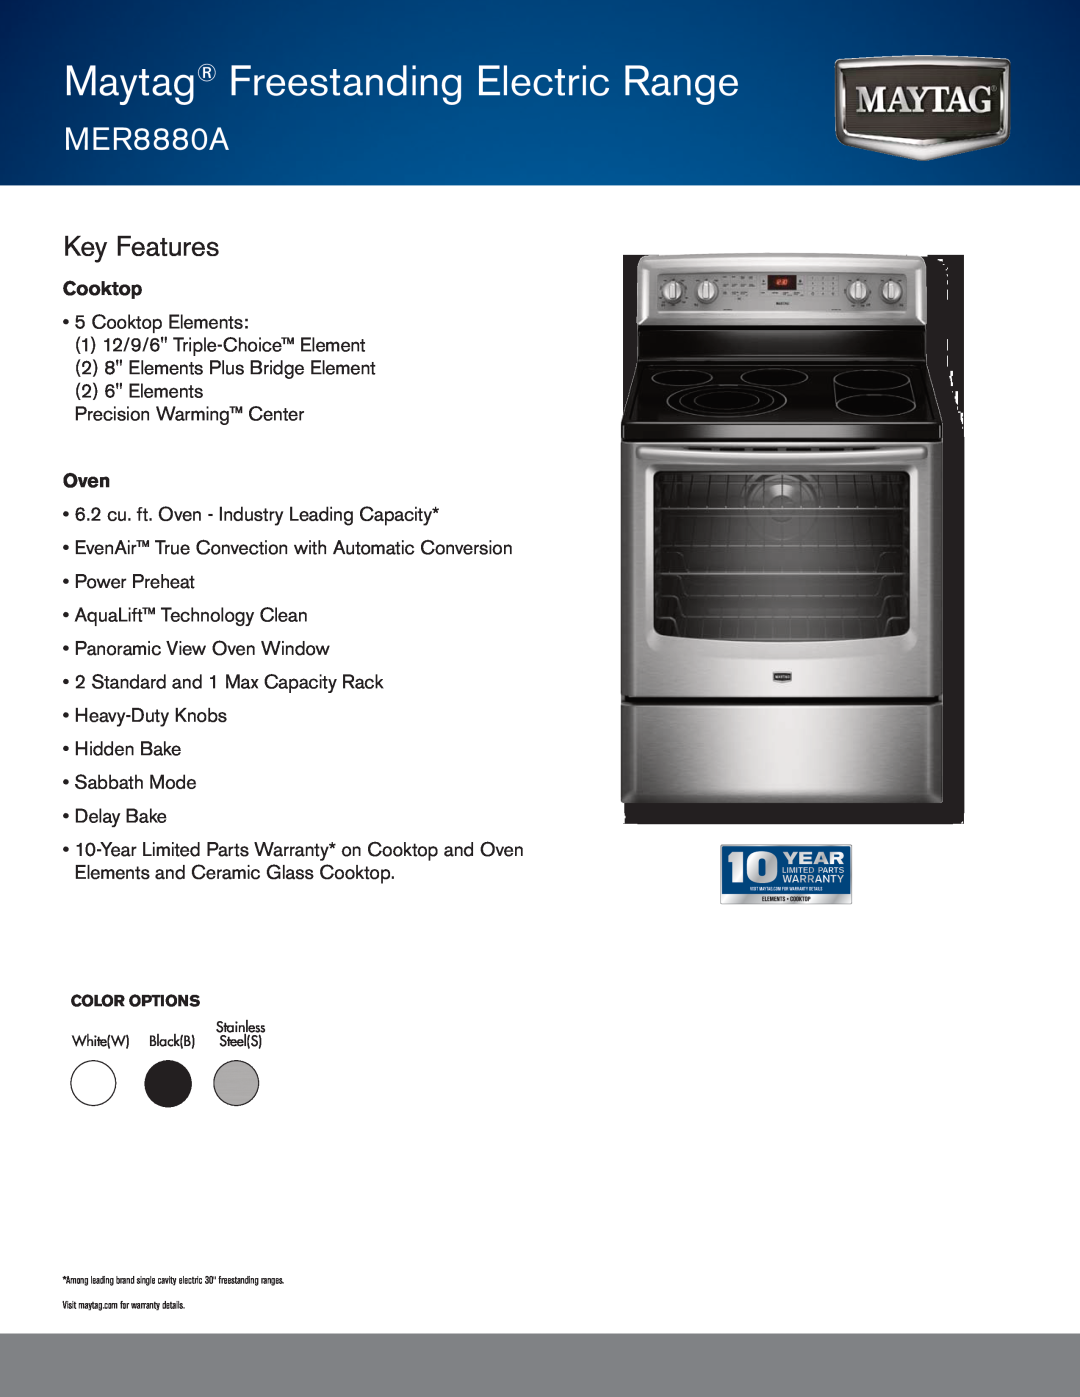 Maytag MER8880A warranty Maytag Freestanding Electric Range, mer8880a, Key Features, Cooktop, Oven 